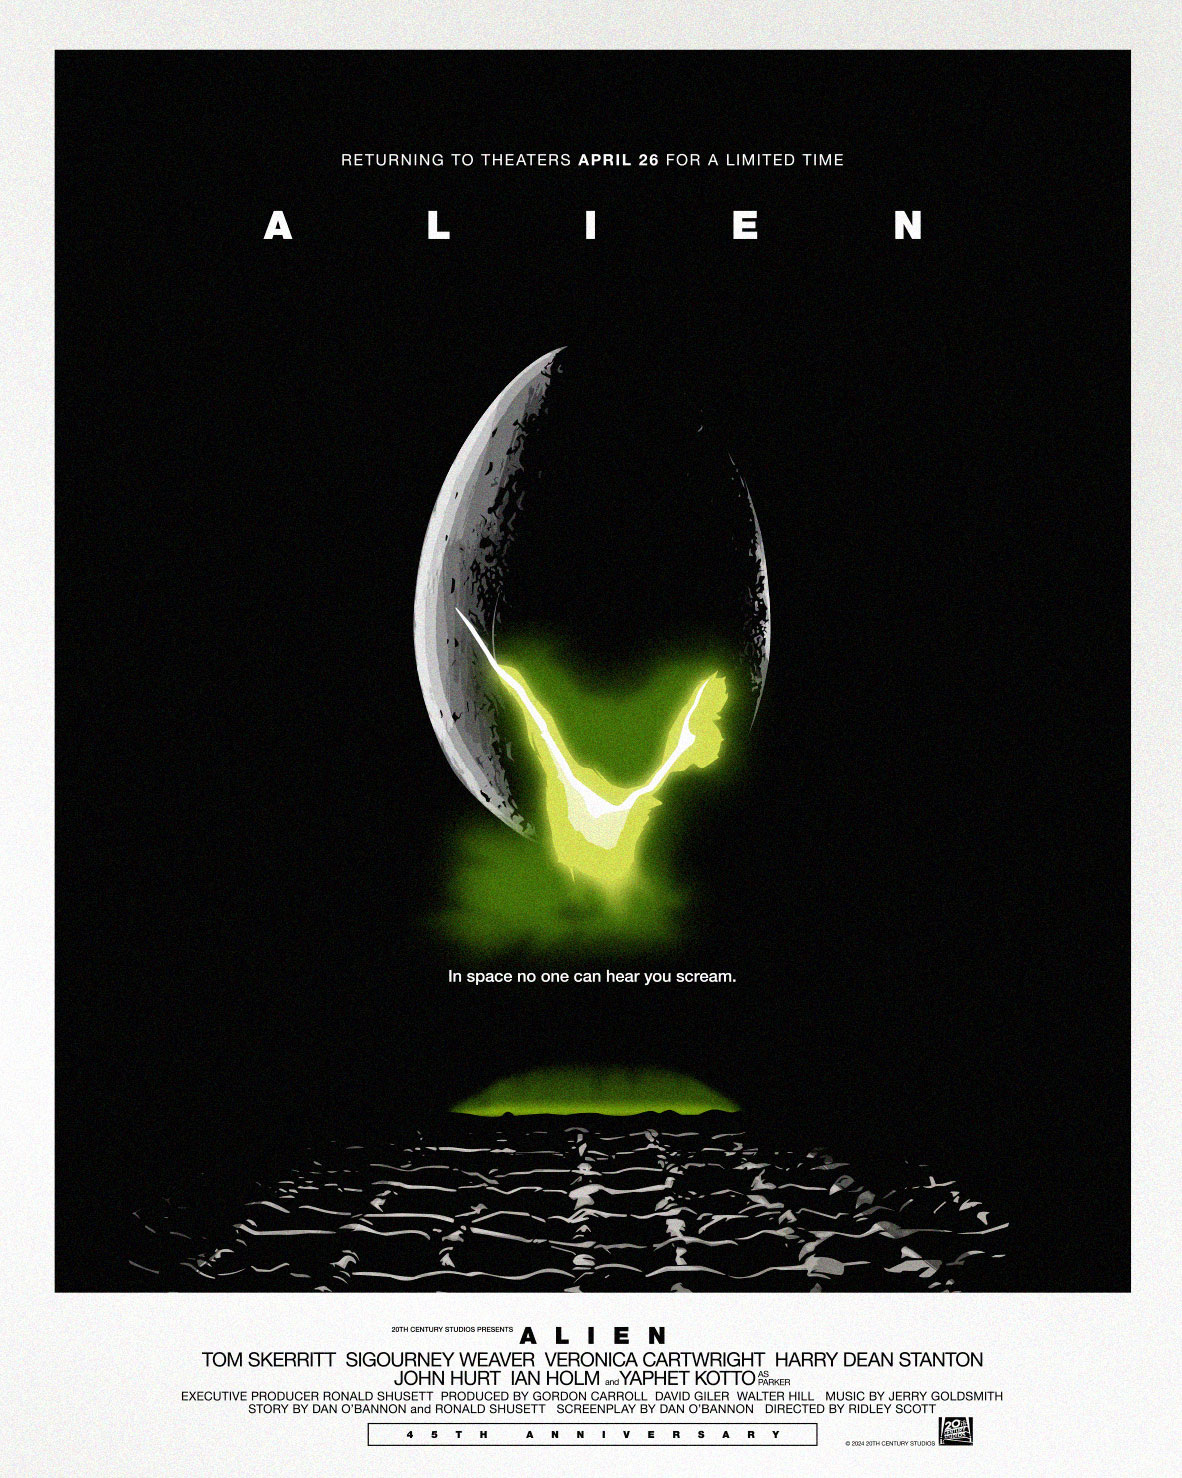 A movie poster featuring a giant alien egg in black and green